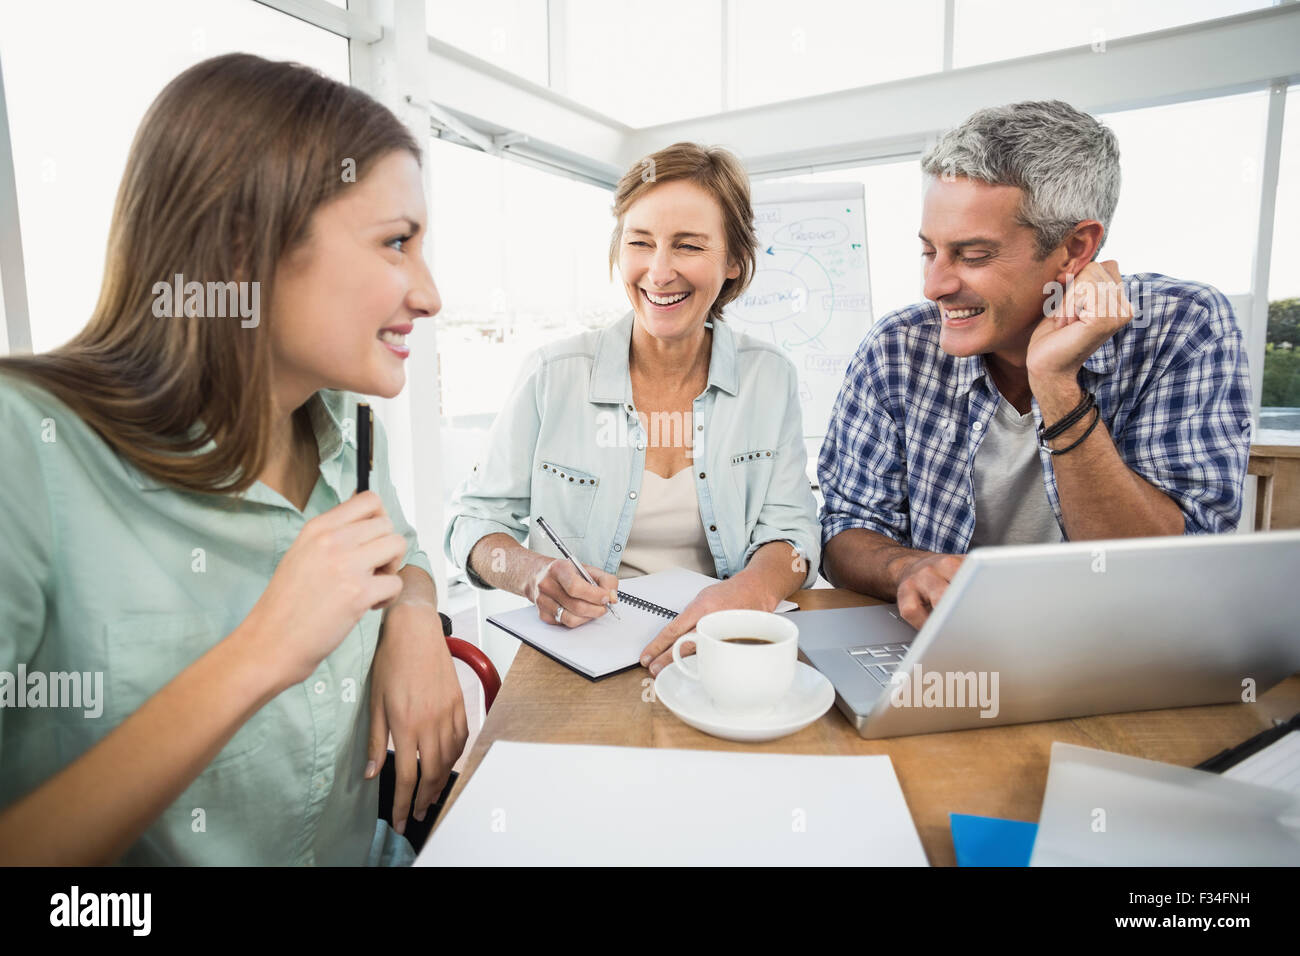 Casual business people speaking together Stock Photo